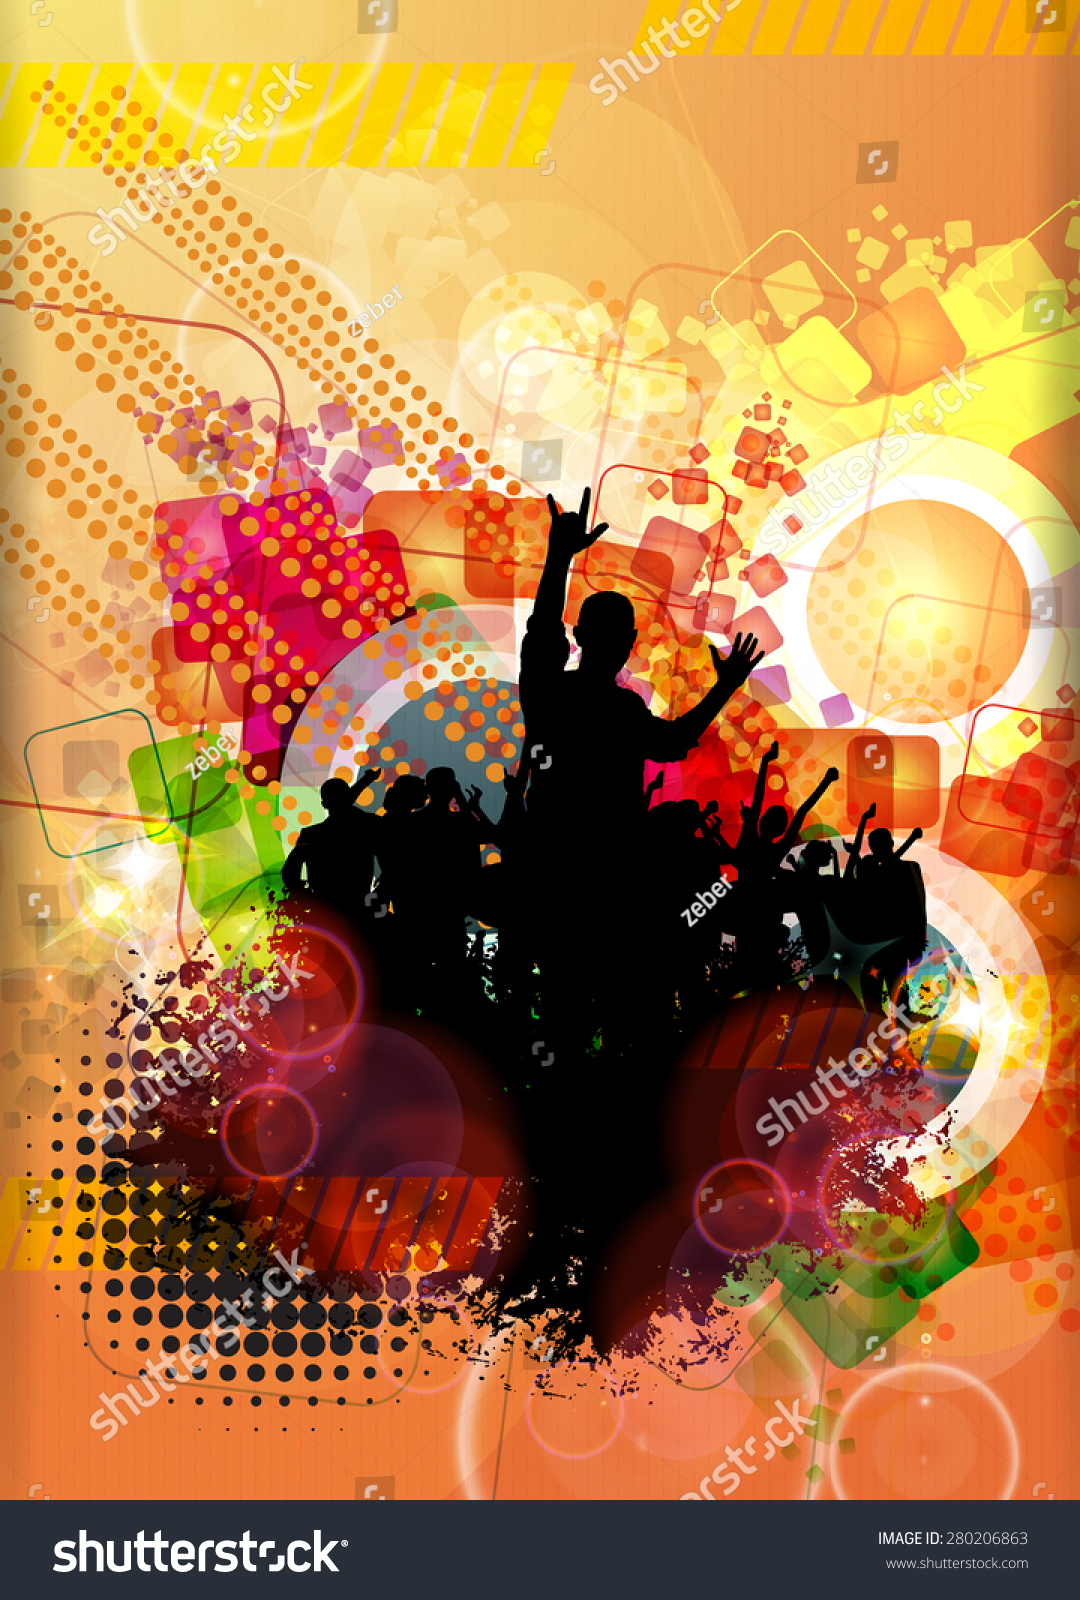 Disco Party Music Event Background Poster Stock Illustration